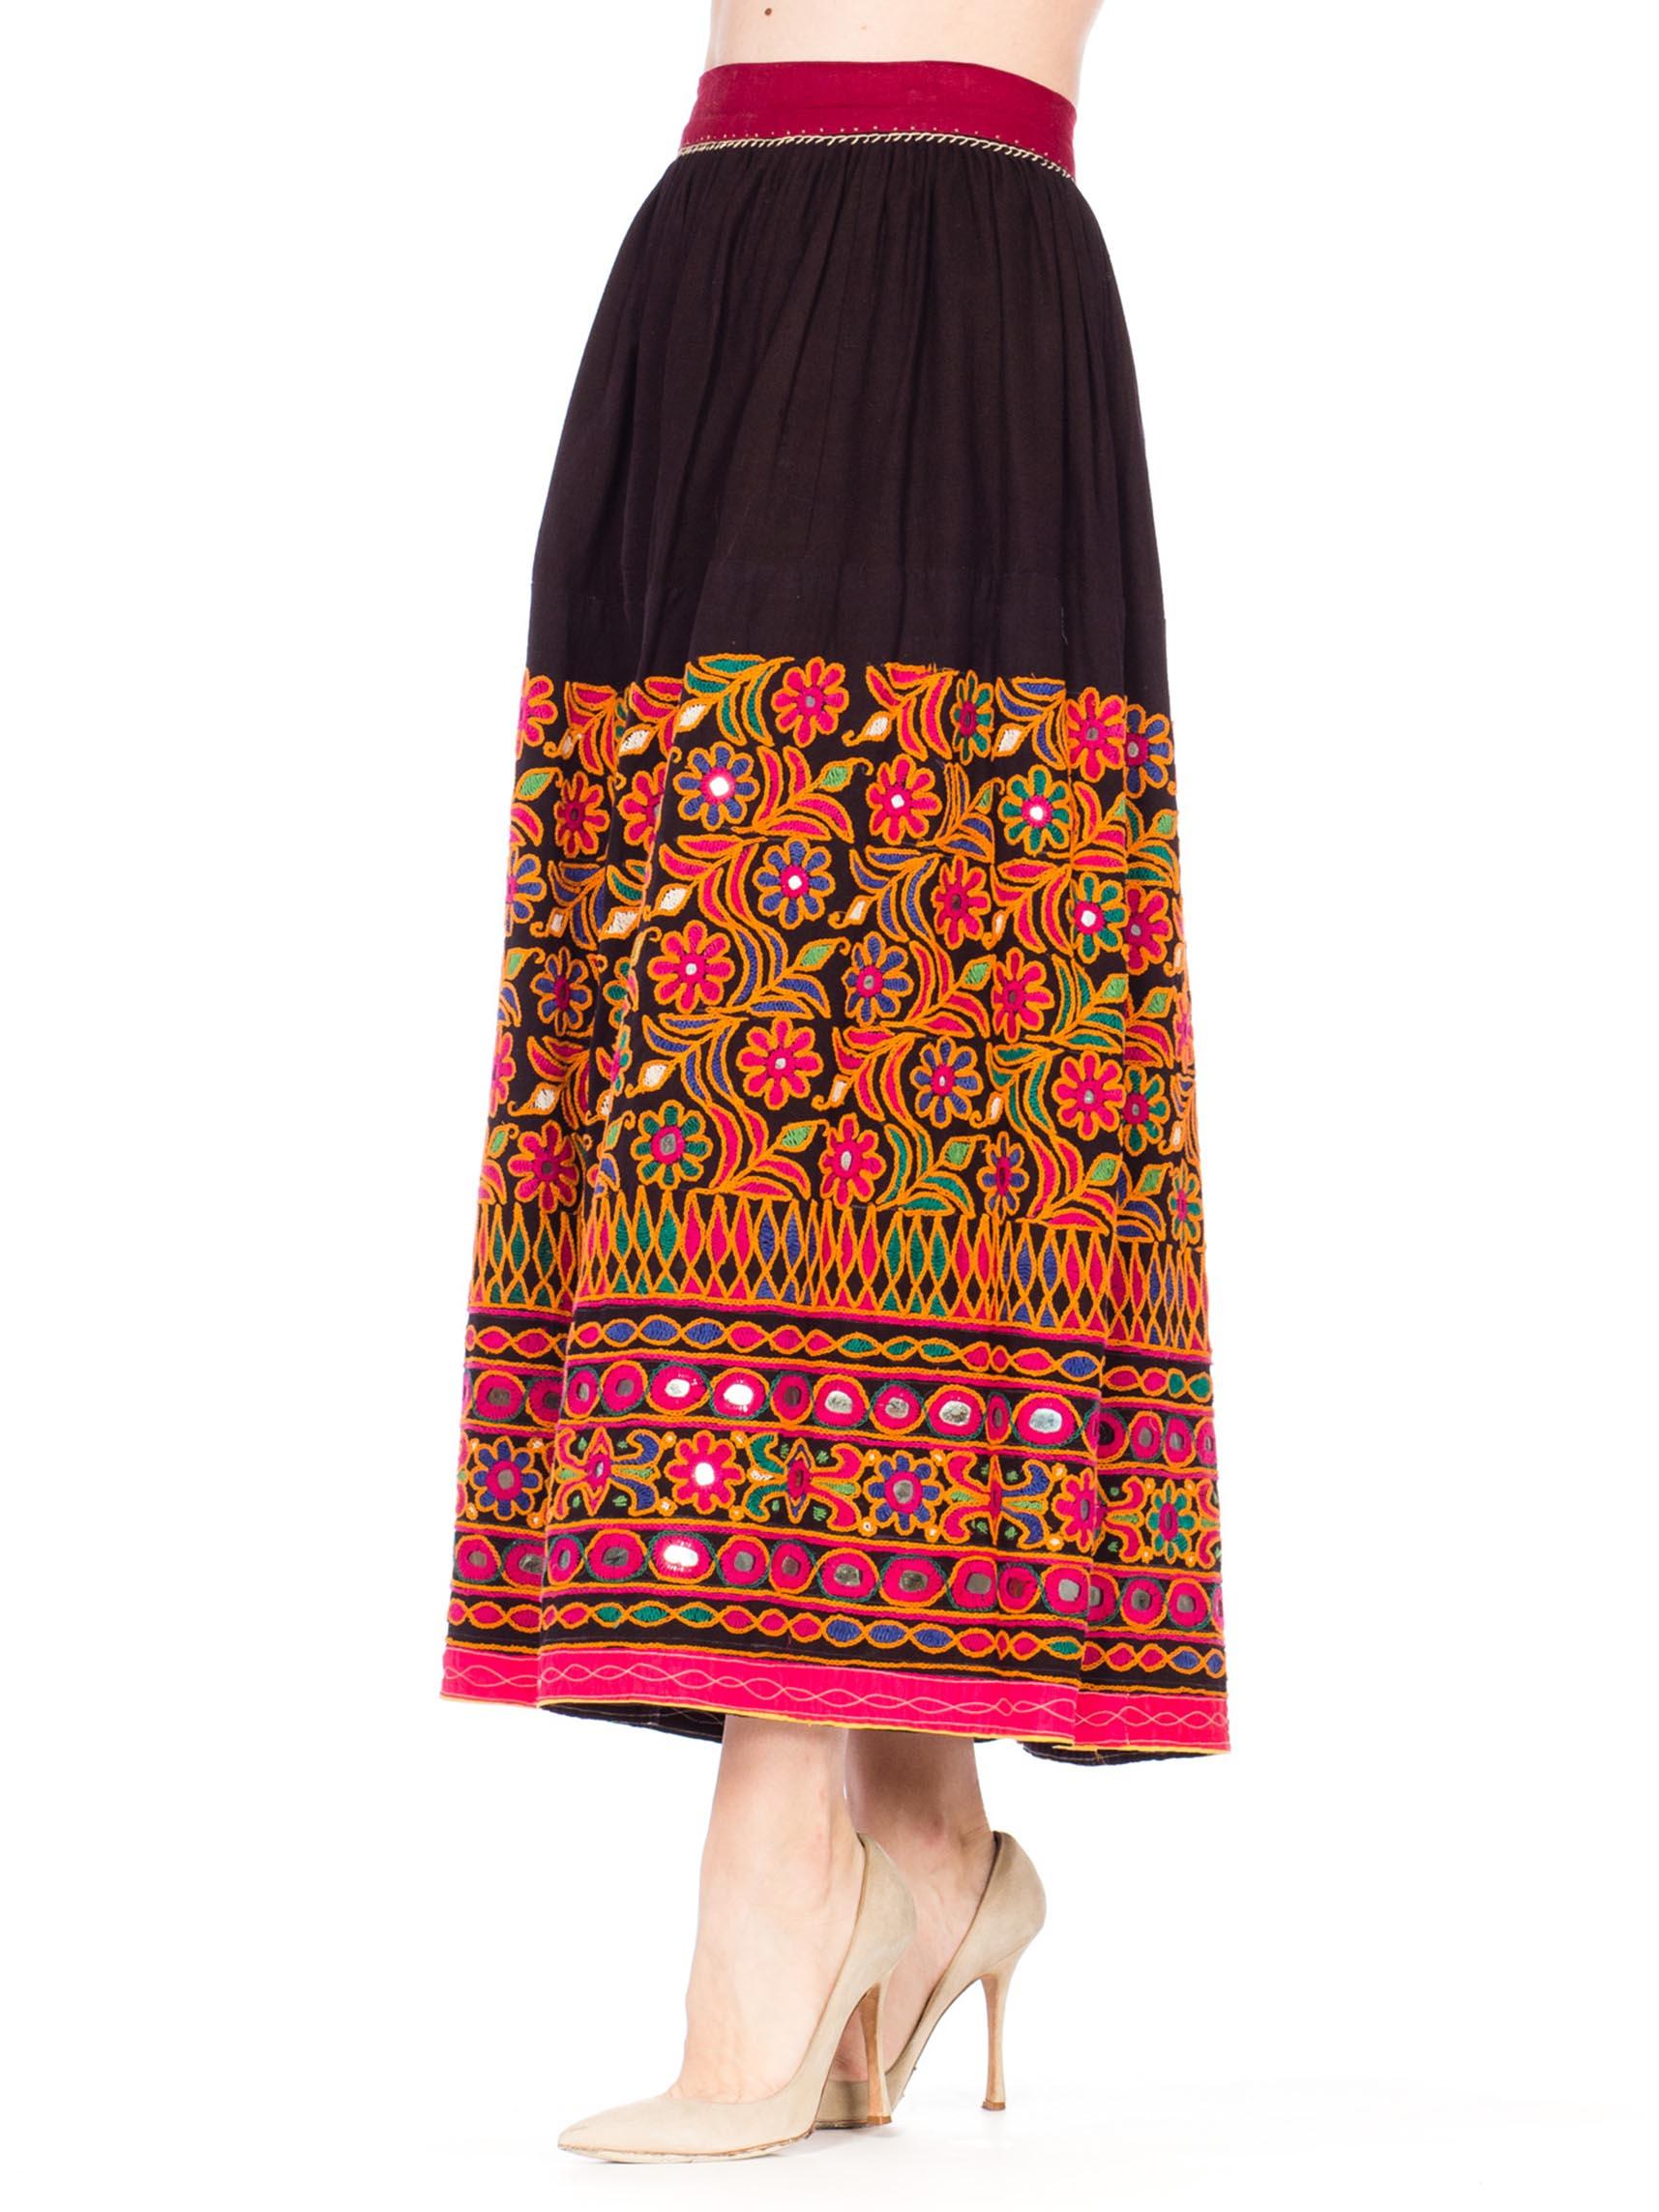 long skirt with flowers